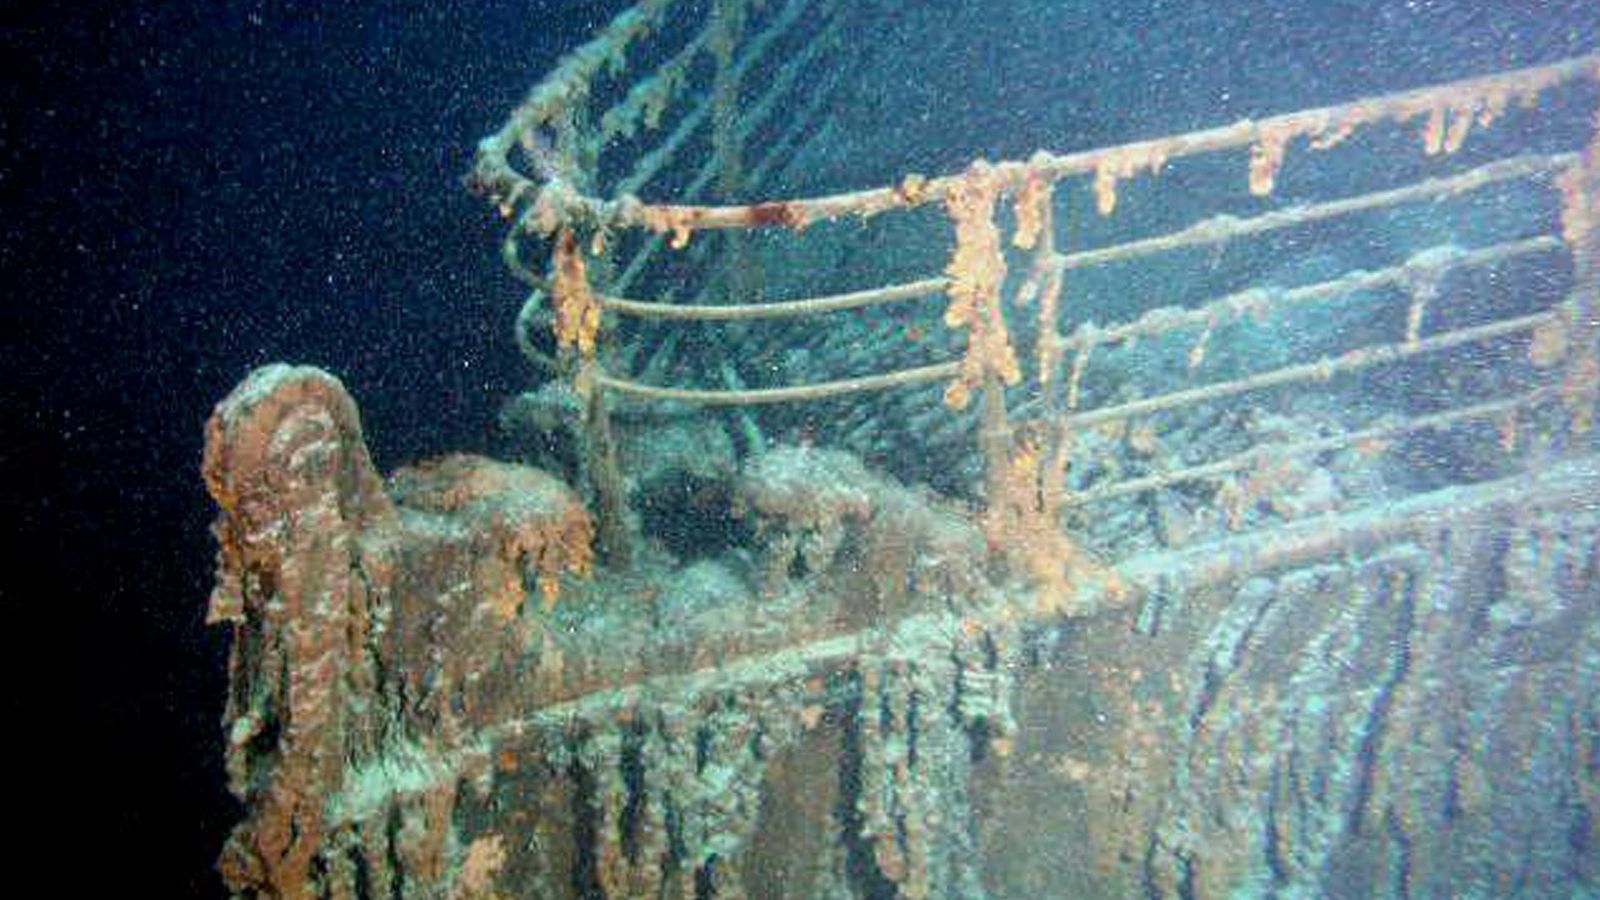 Submersible at Titanic wreck goes missing | News UK Video News | Sky News